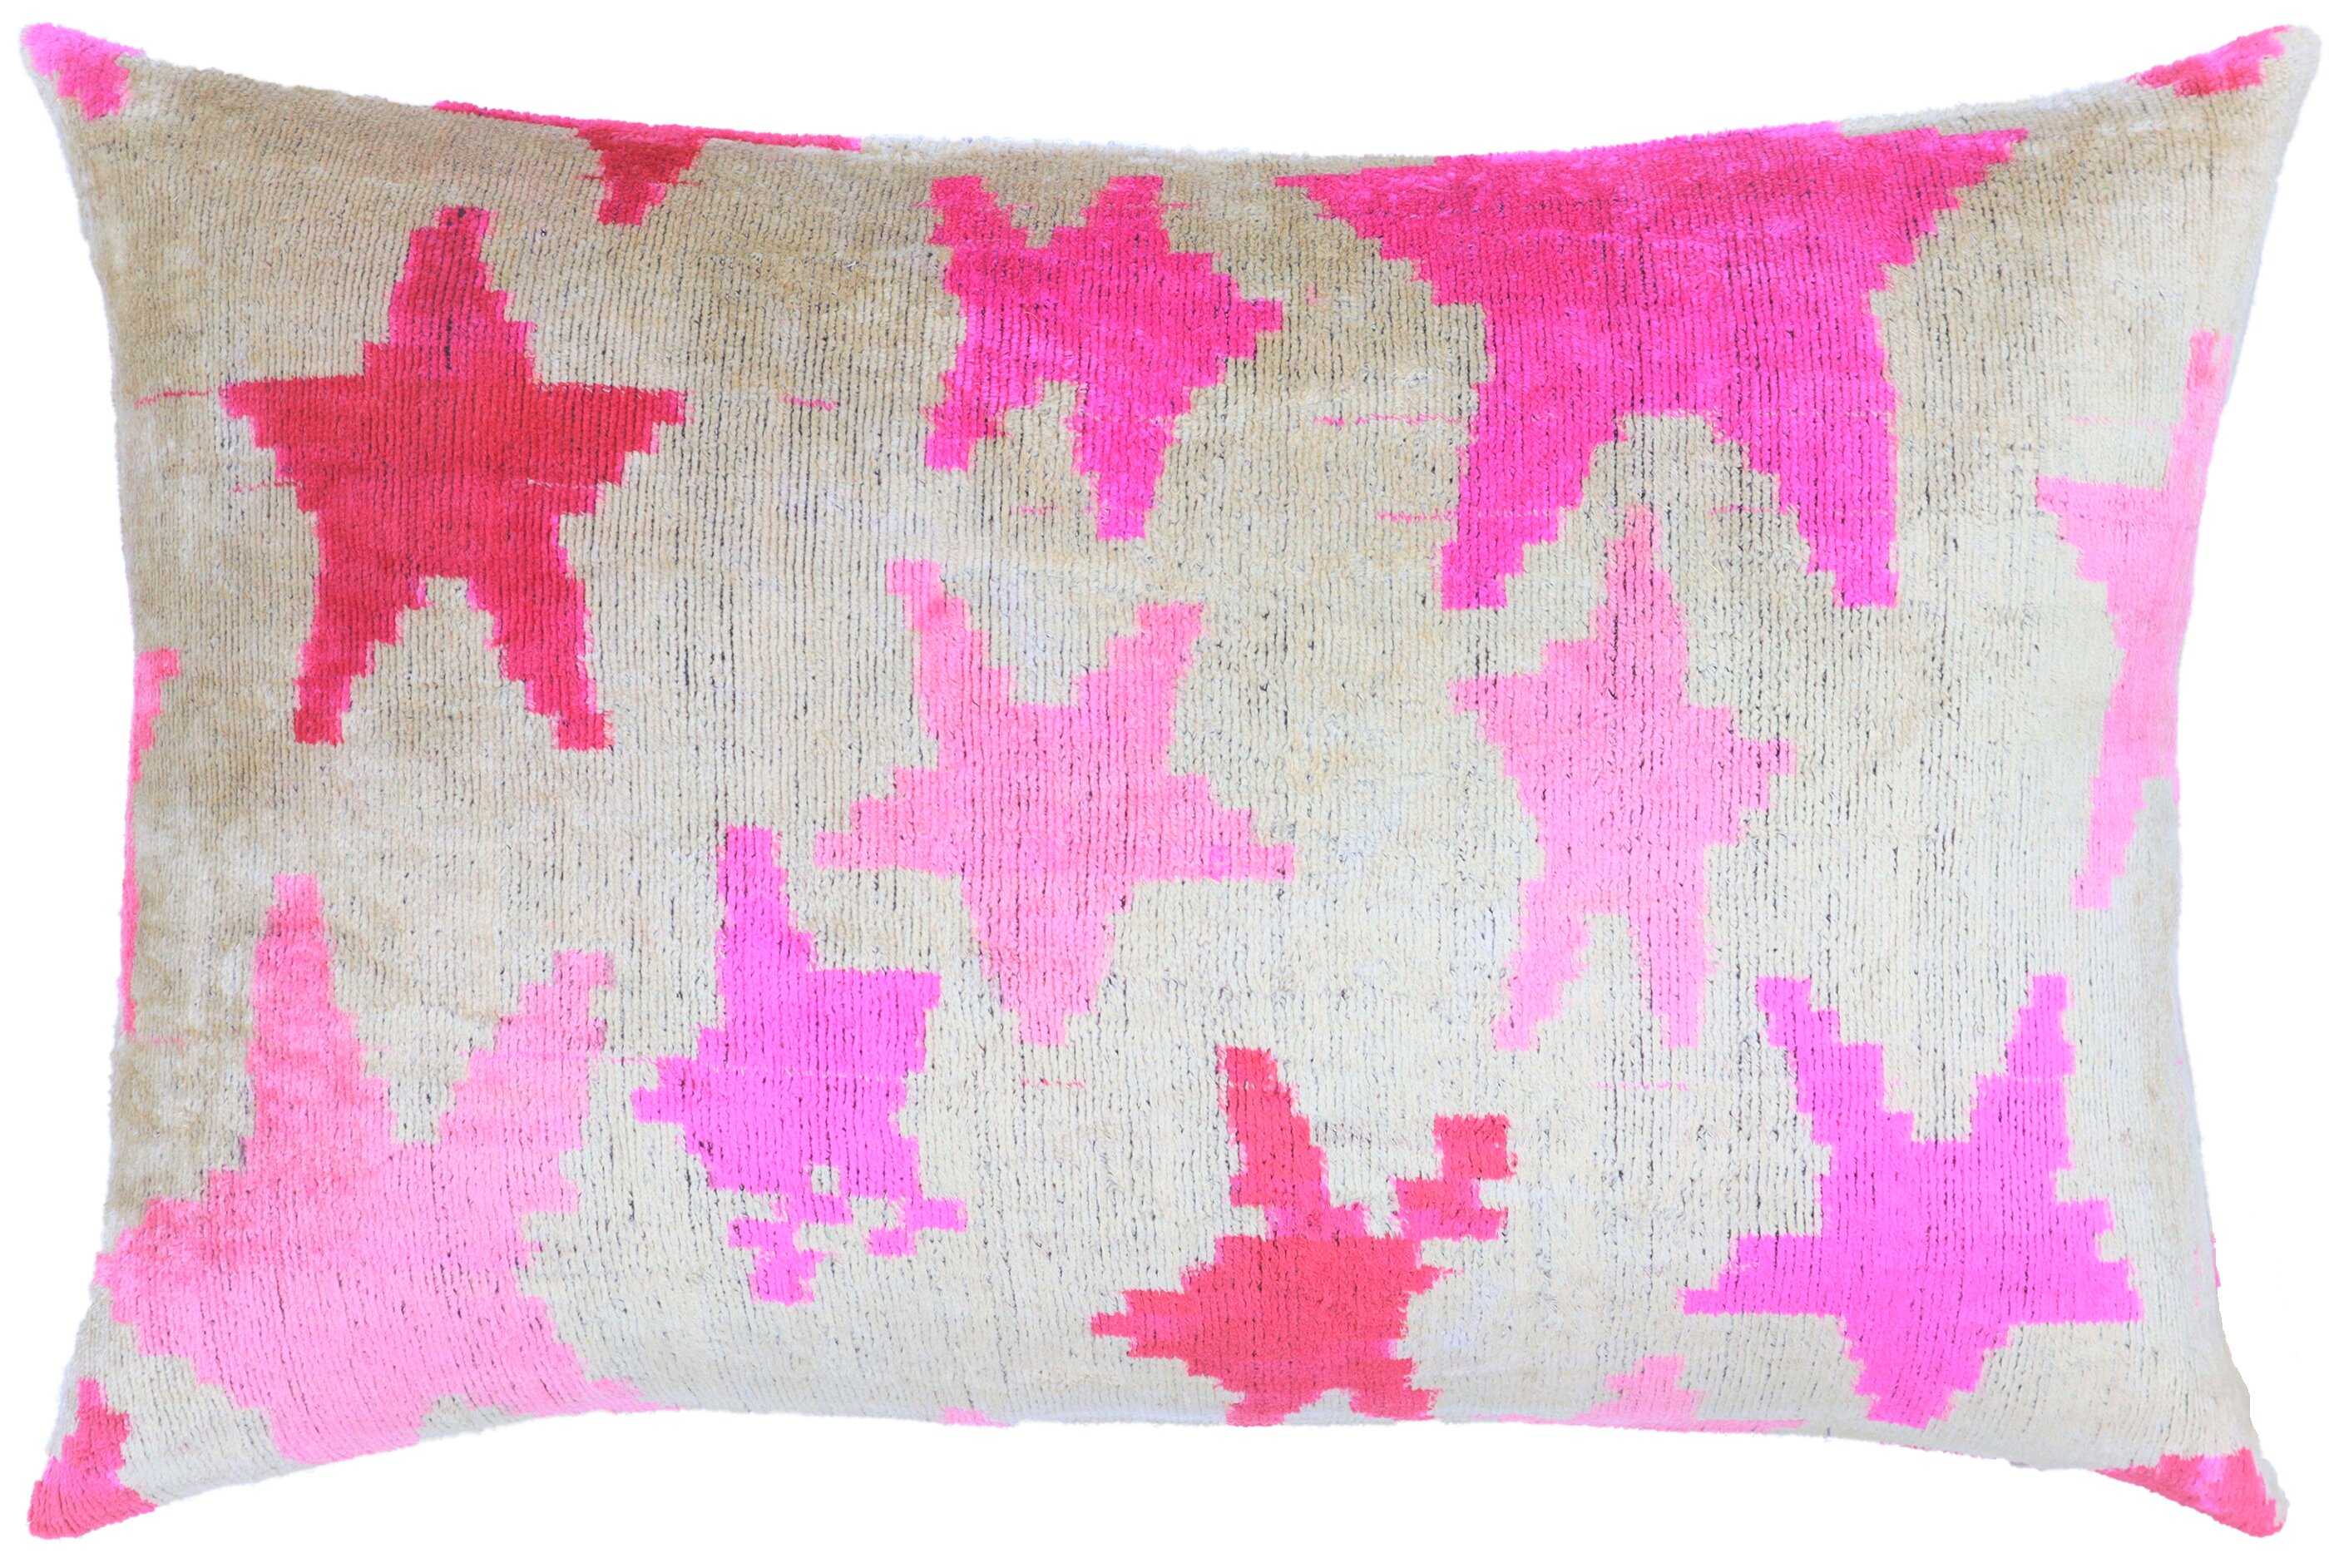 Company C Pillow 18 x 18 100% Silk Duck Feather Insert Colorful Accent  Throw